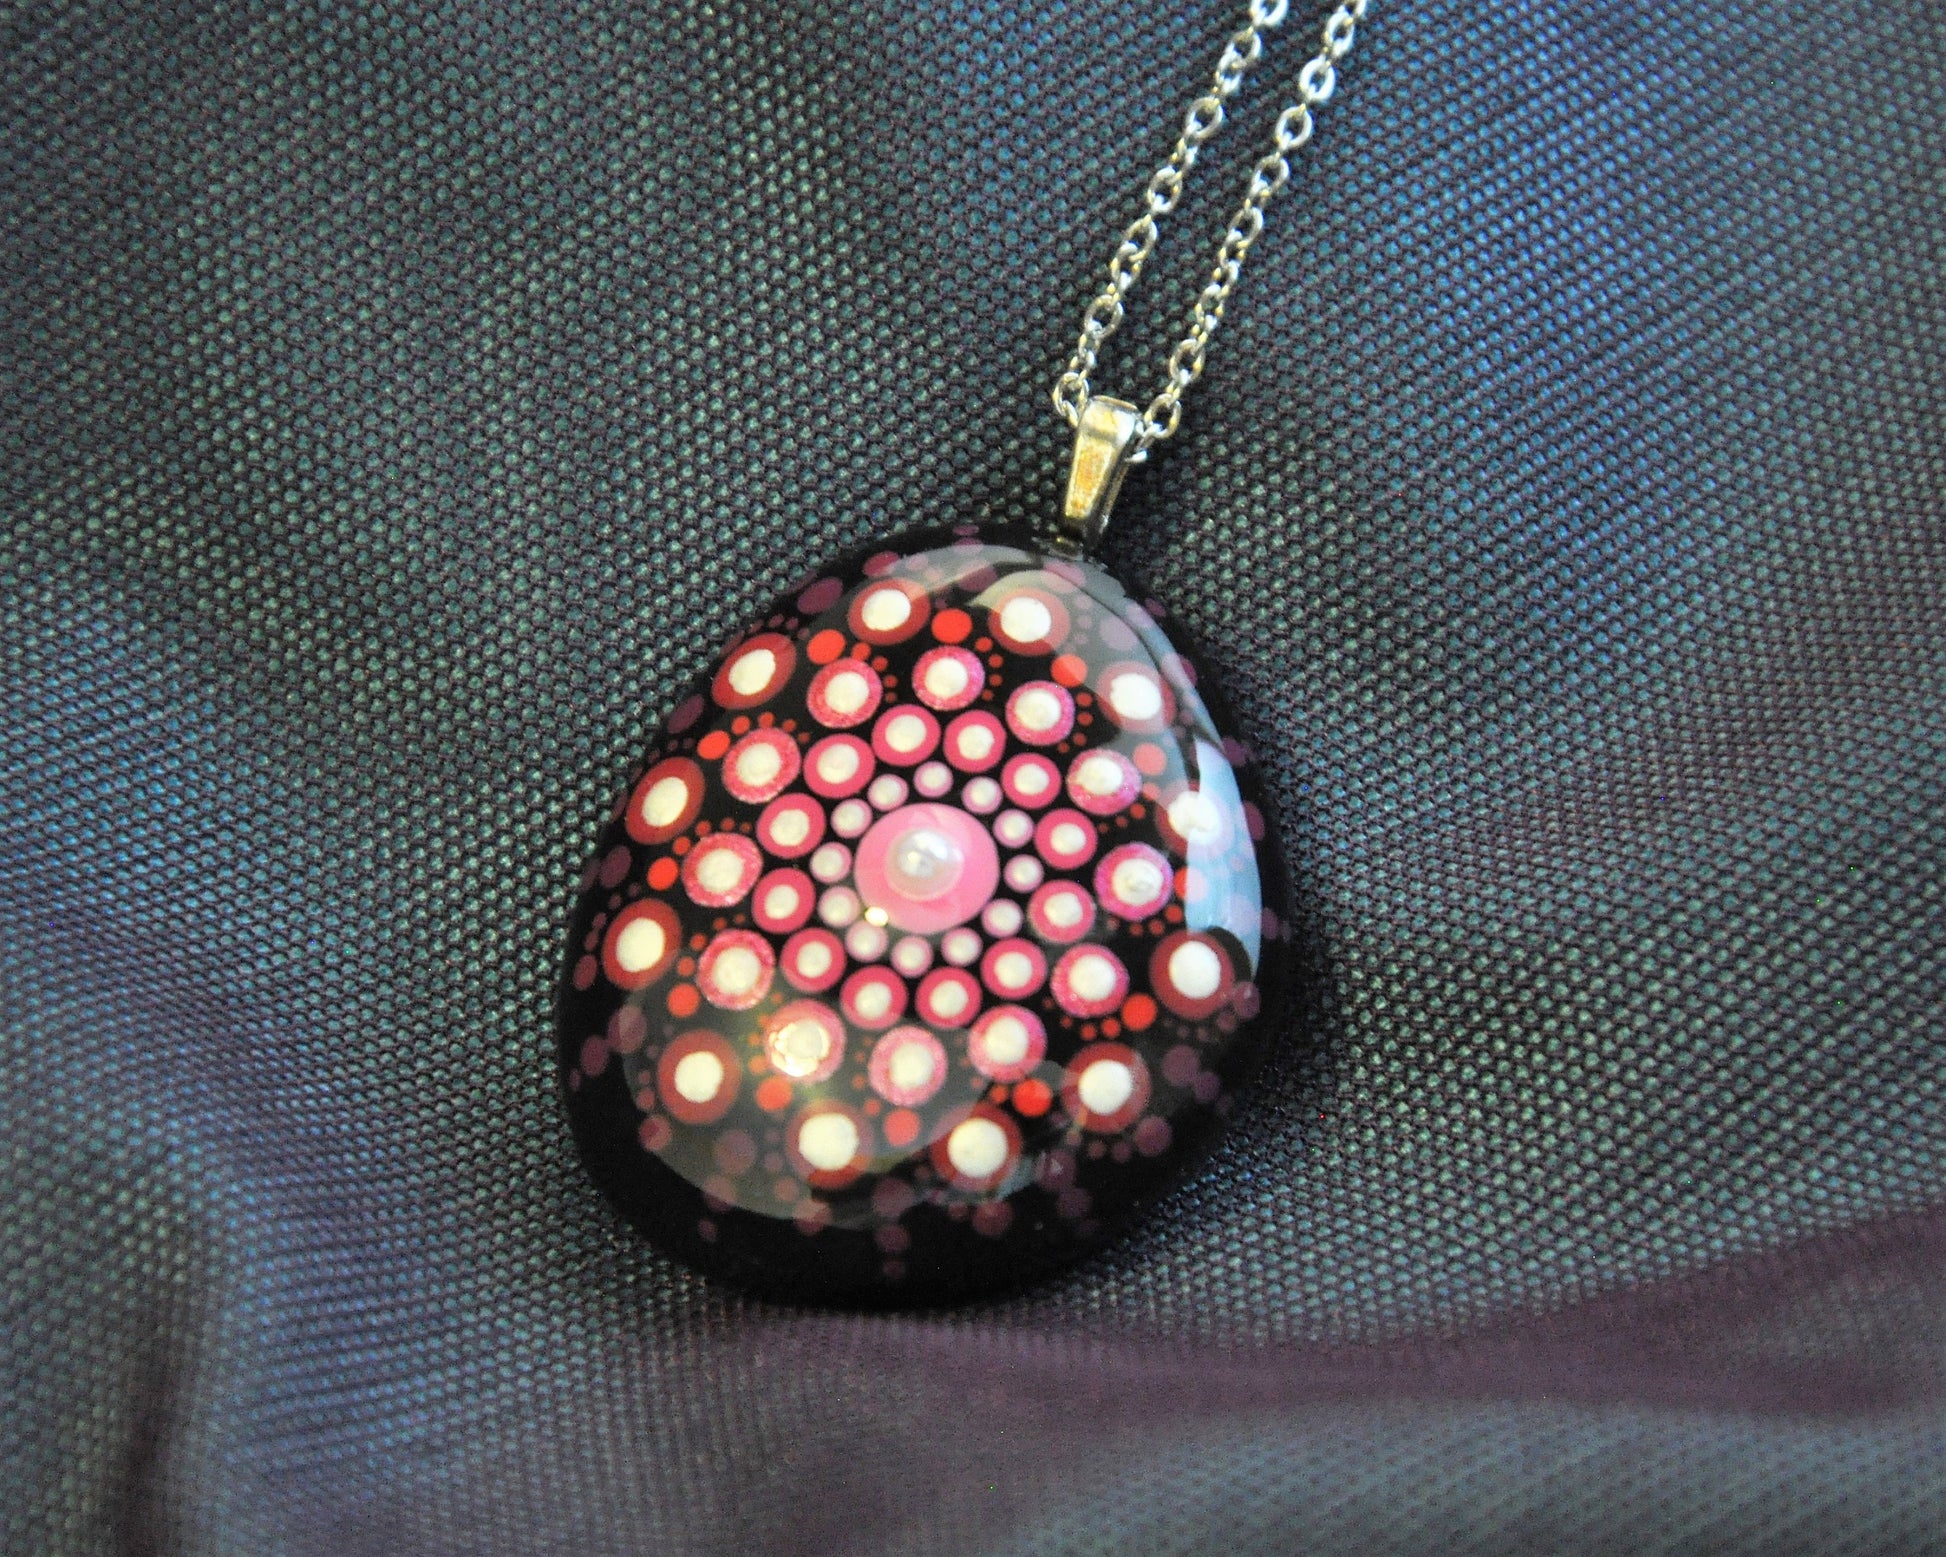 Handpainted Pink / Red Mandala Necklace, Stone / Rock Pendant, Sealed w/ Resin, Hypoallergenic Stainless Steel Chain, Lobster Claw Closure